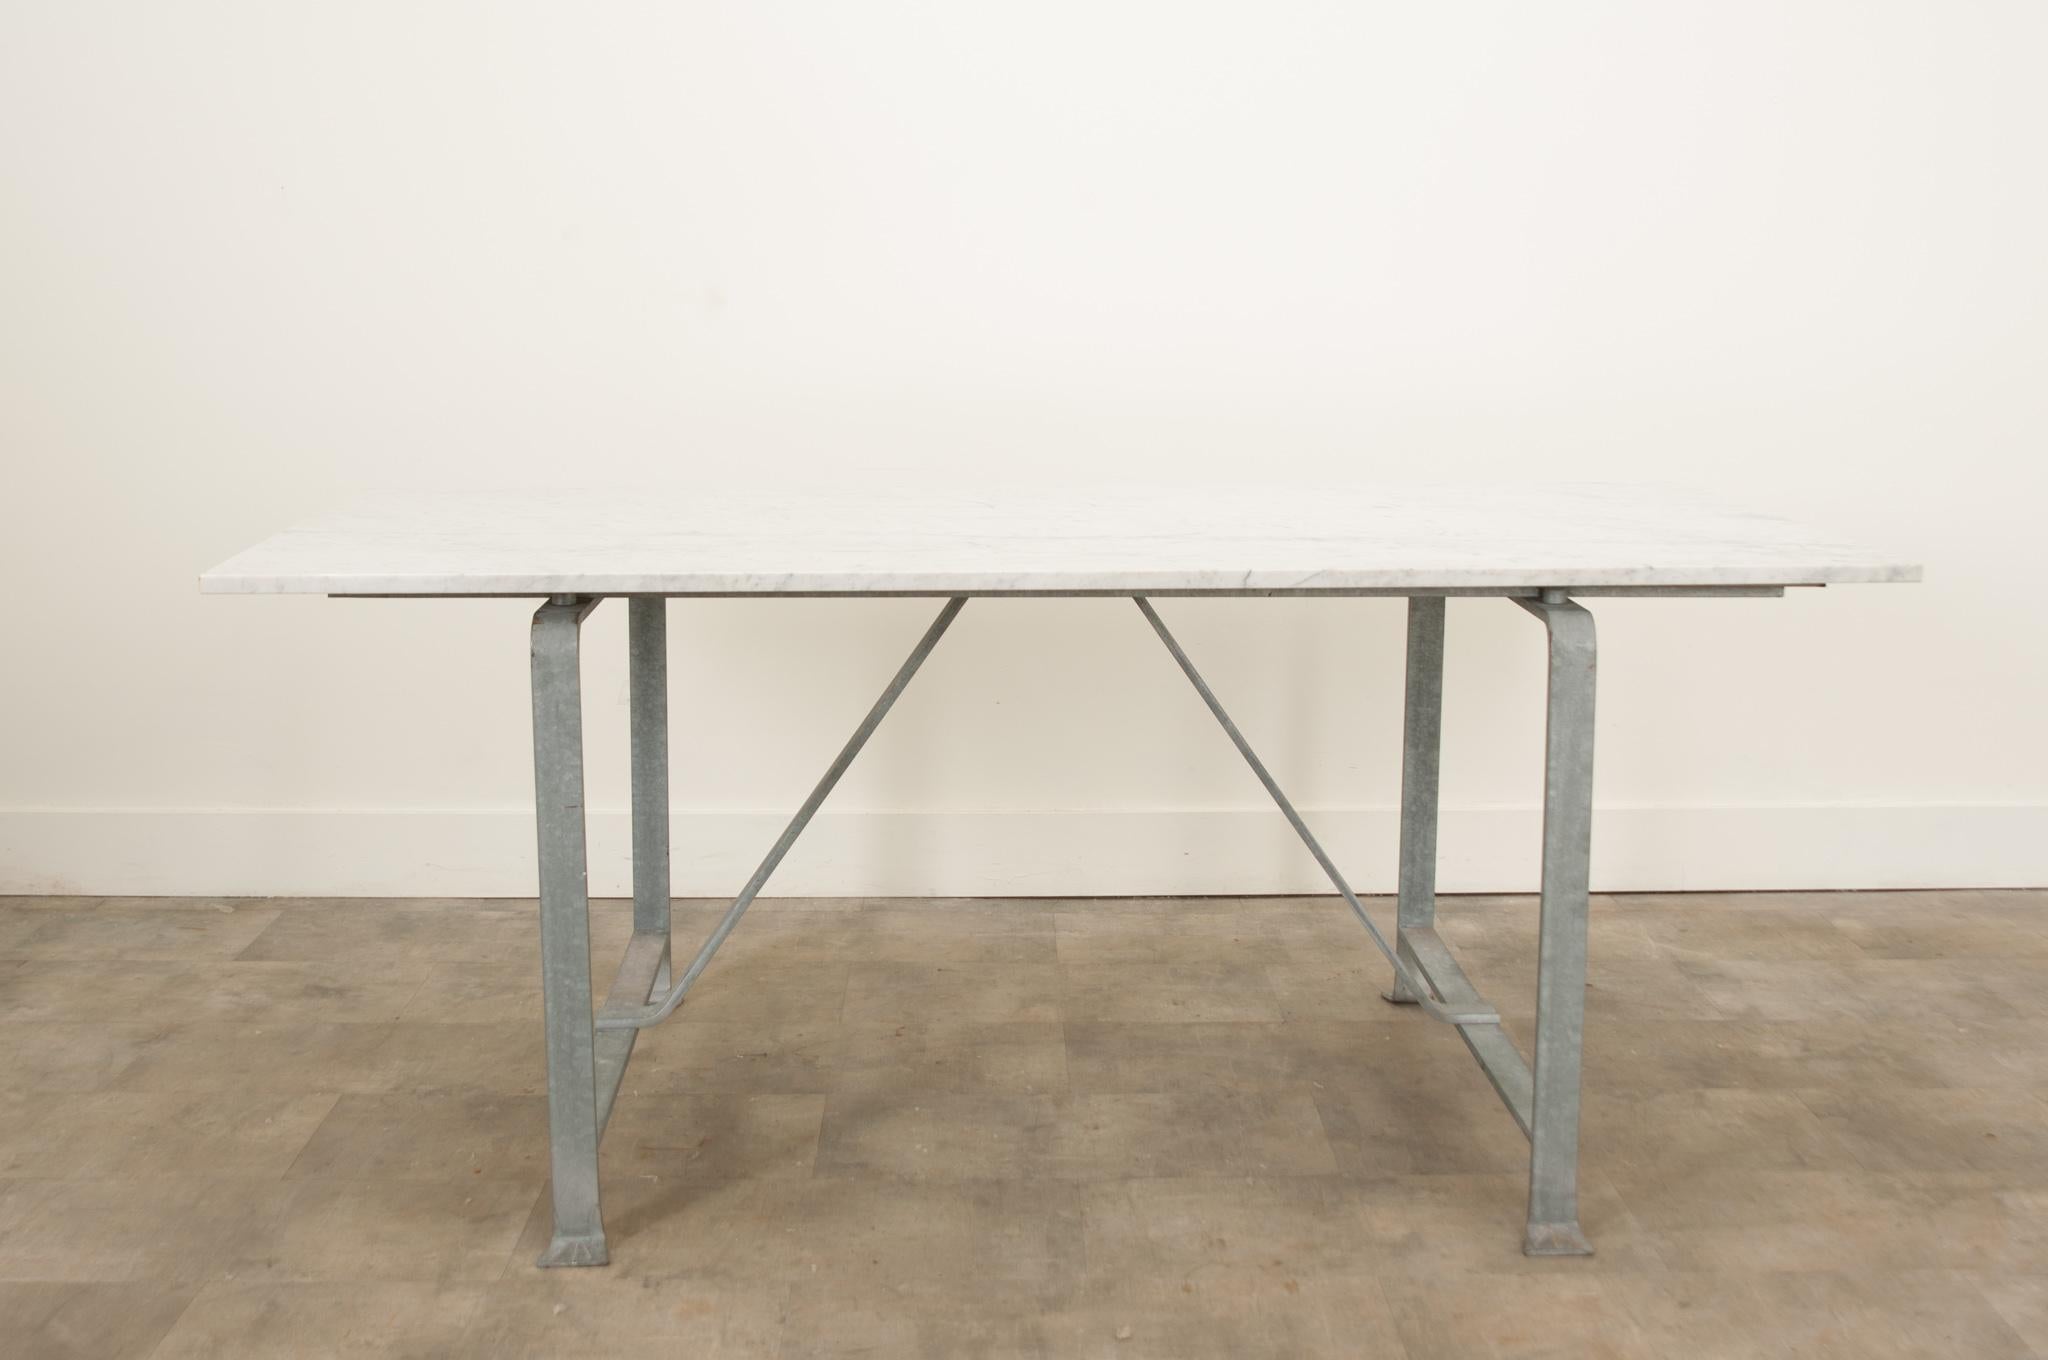 A vintage English iron dining table with a white marble top hand made in England circa 1900’s. The table is raised by an attractive wrought iron base with a lovely gunmetal gray finish and features elegant lines, a connecting stretcher for